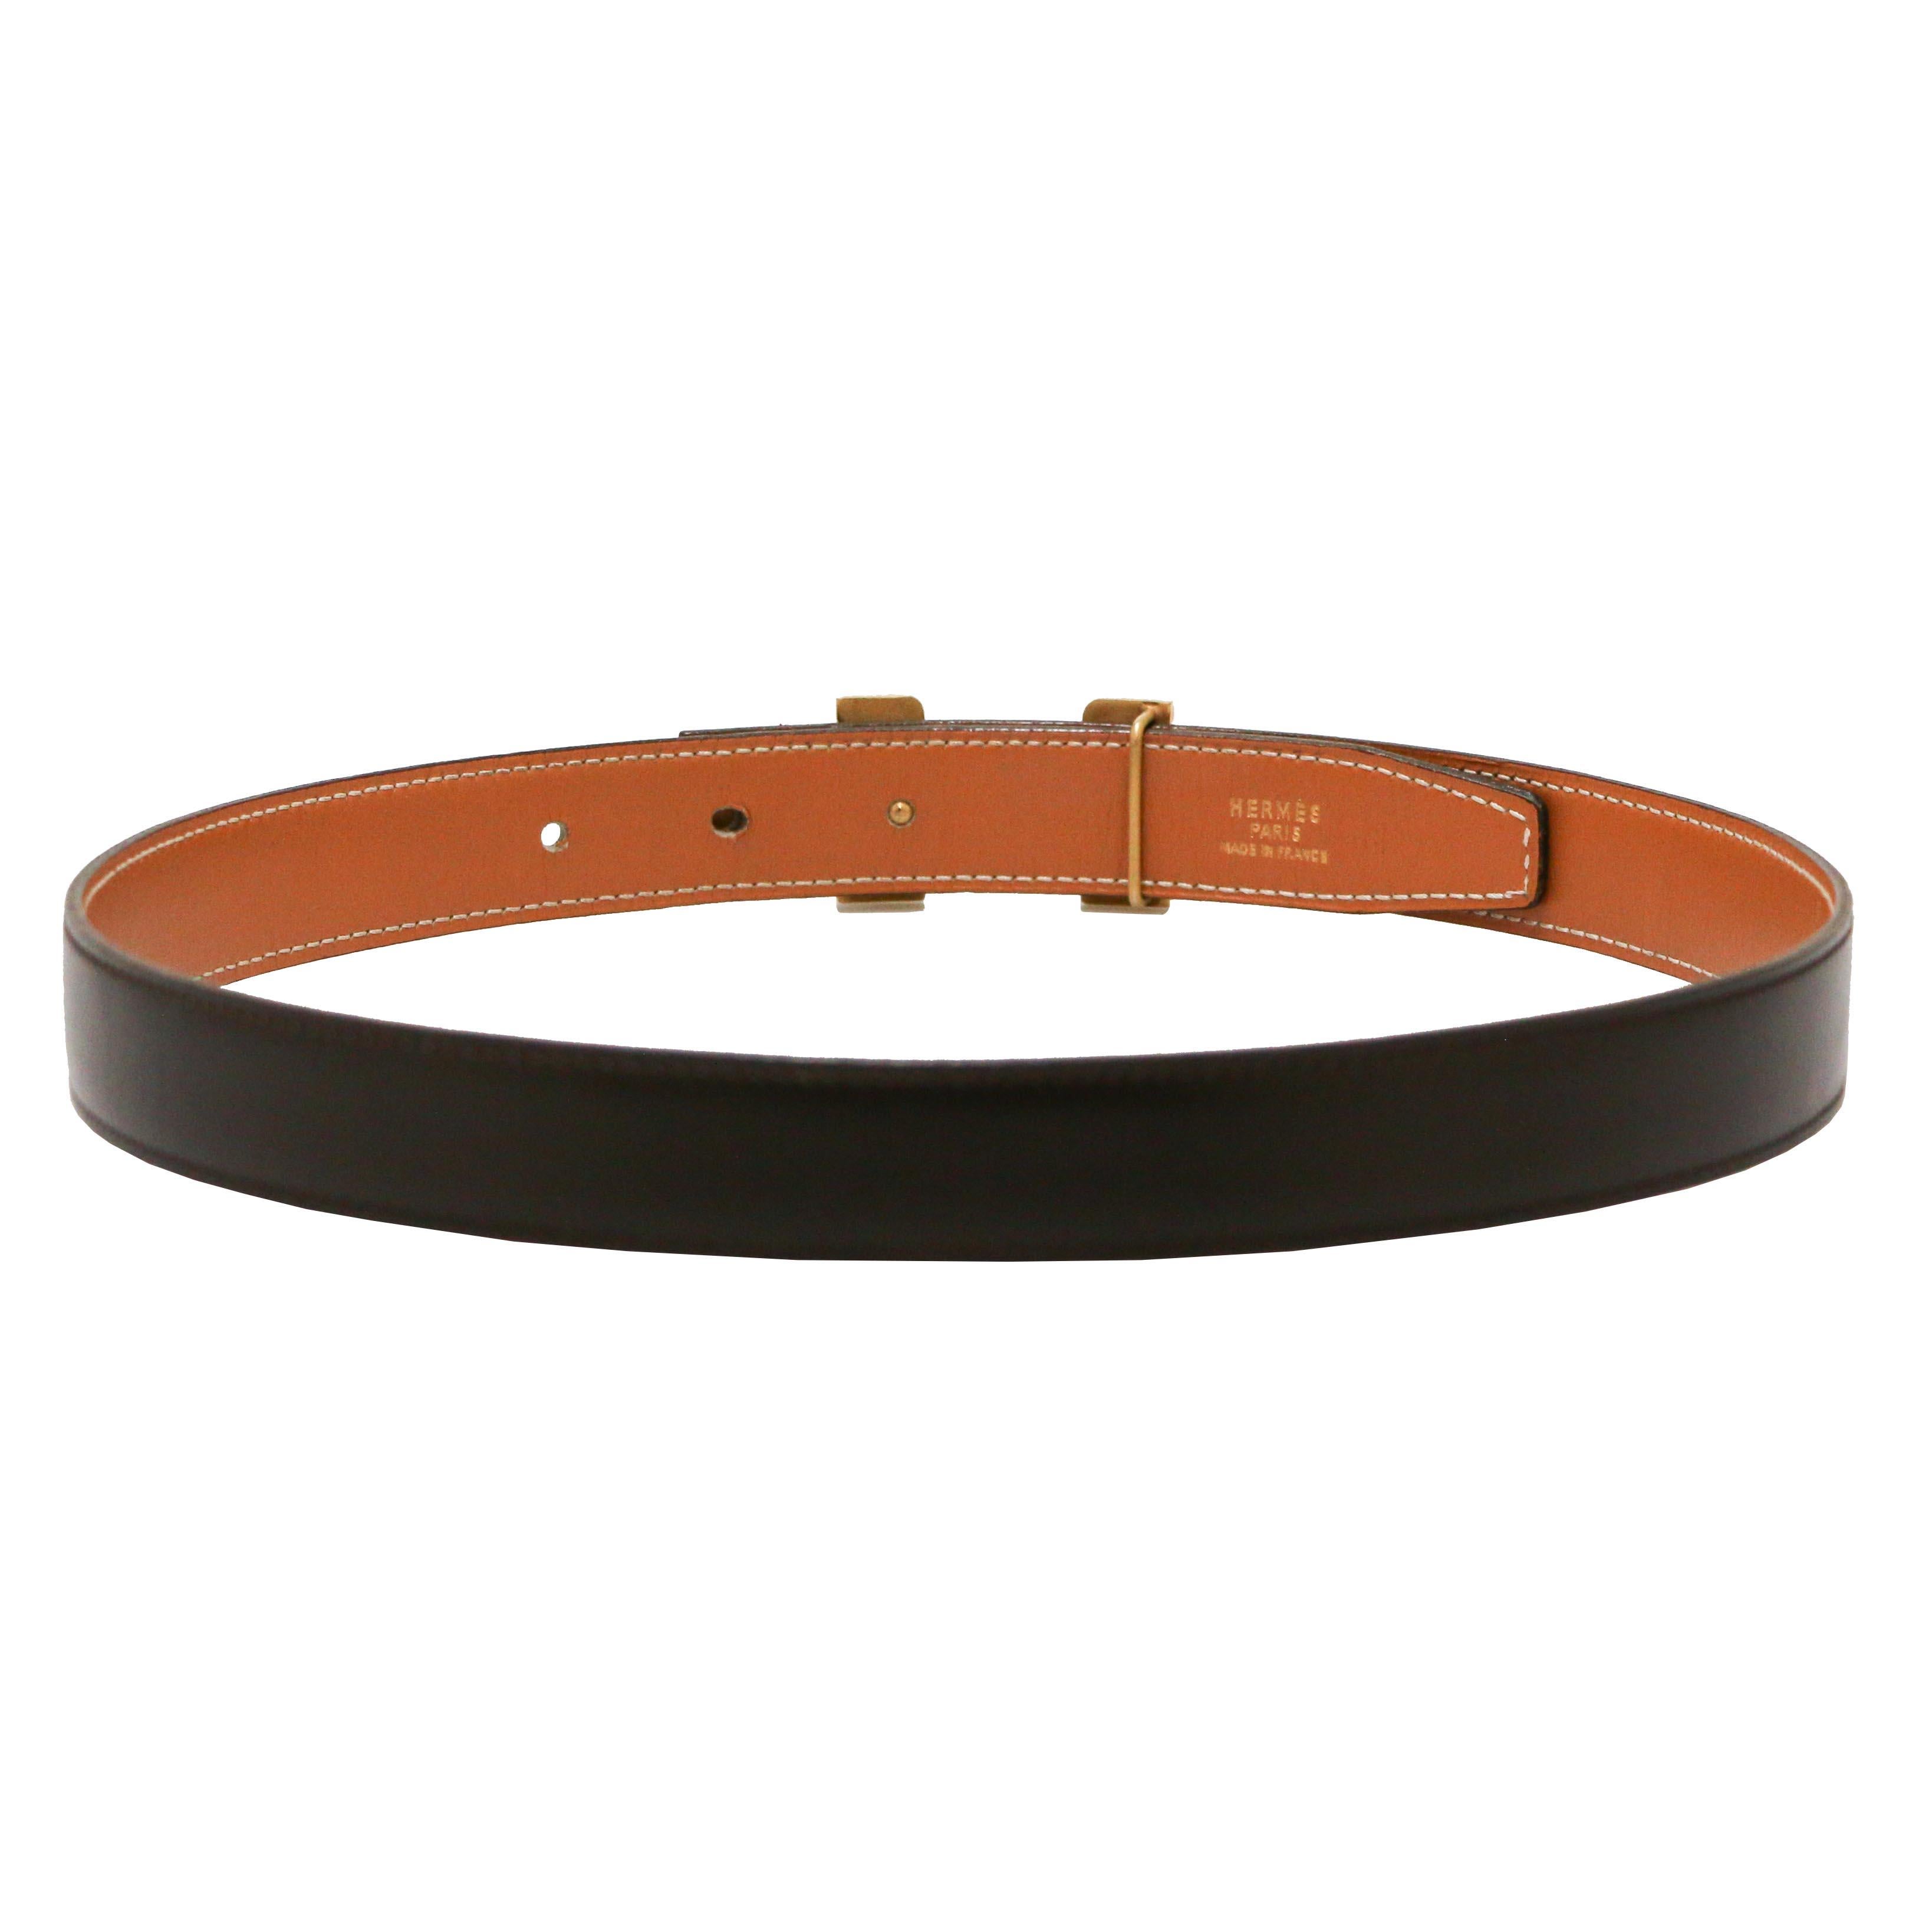 Beautiful Hermès H belt, reversible and bicolor gold and brown
Condition : excellent
Made in France
Size : 65 cm
Thickness : 34 mm
Material : leather
Color : gold, brown
Hardware : golden (micro-scratches)
Details : reversible and the H buckle is